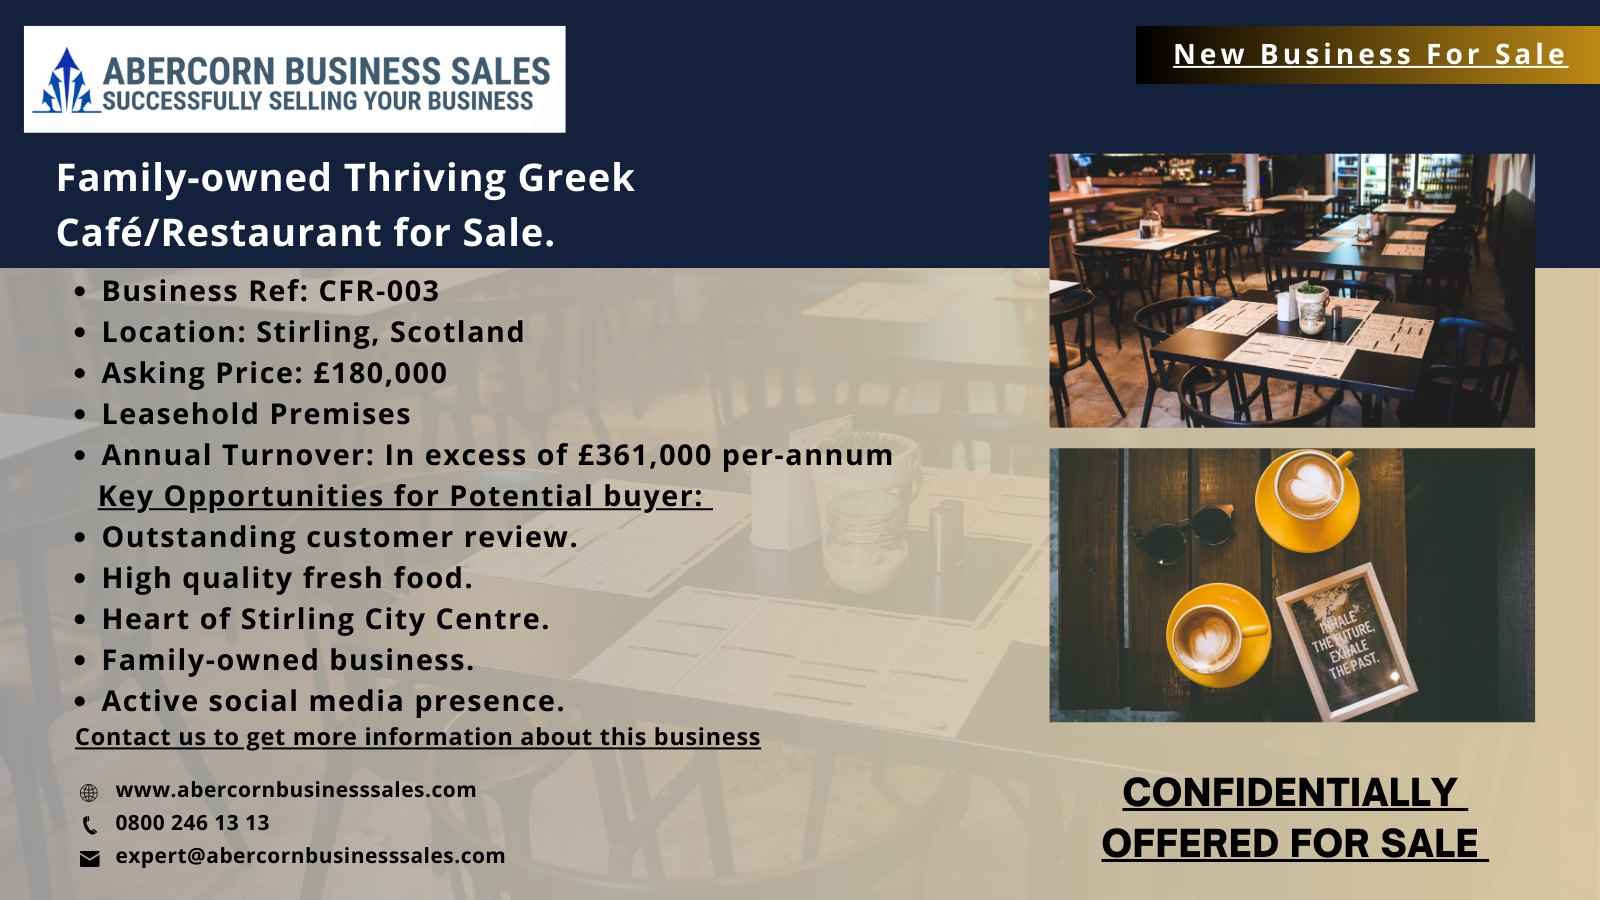 CFR-003 - Family-owned Thriving Greek Cafe and Restaurant for Sale